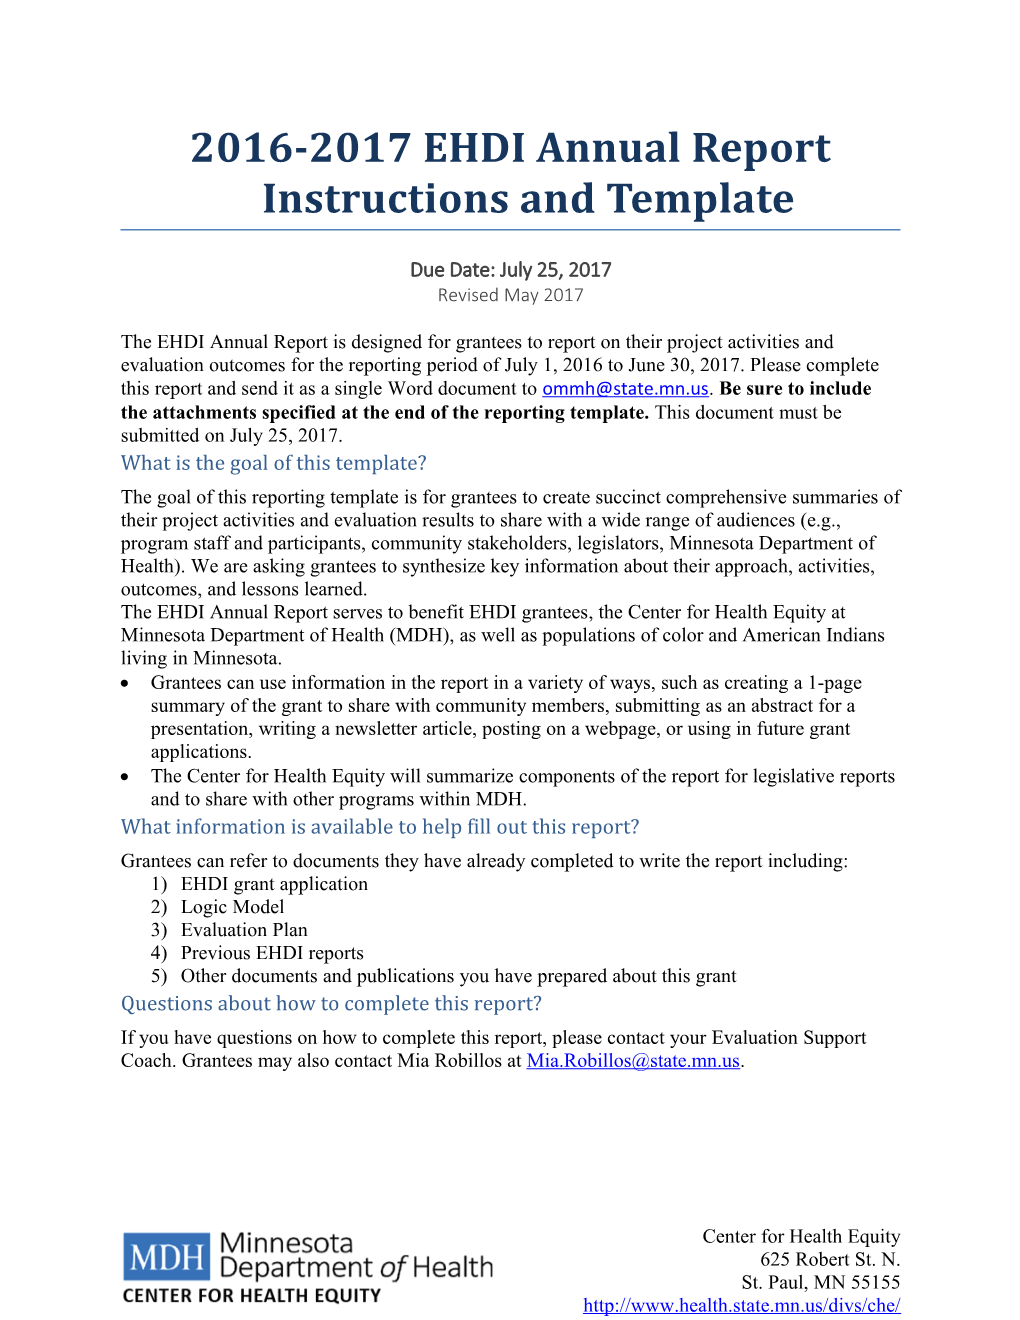 2015-2016 EHDI Evaluation Report Instructions and Template